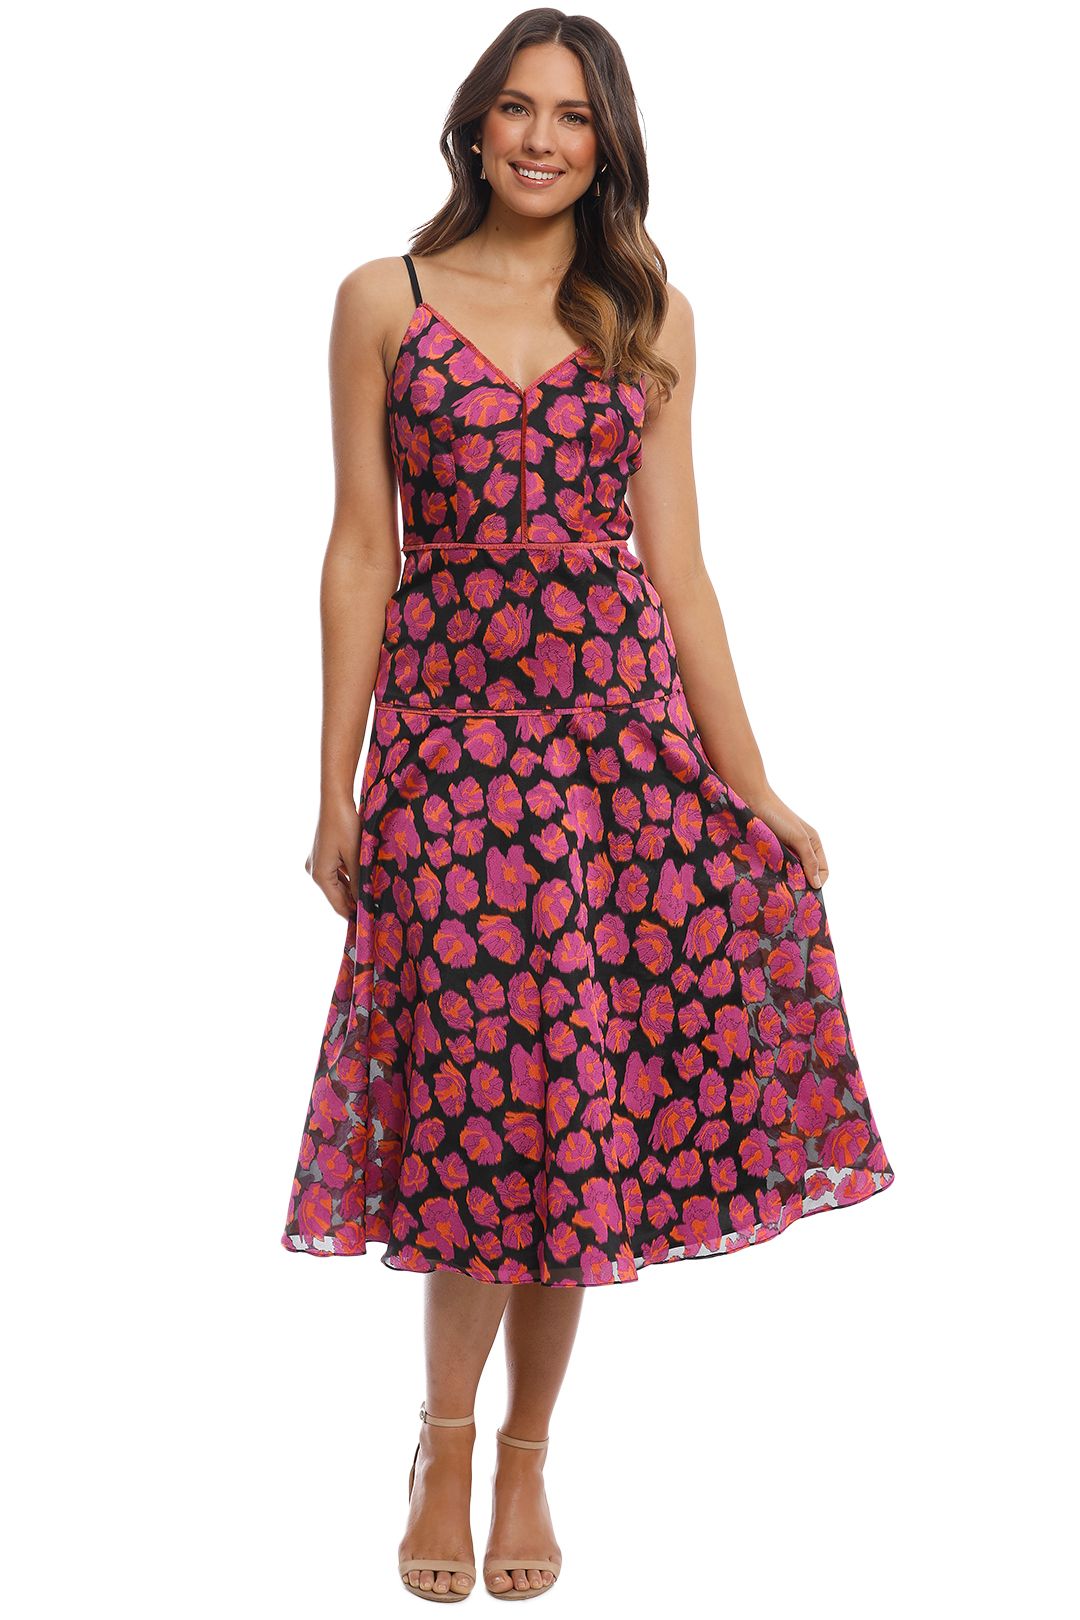 Moss and Spy - Lysander Dress - Pink Multi - Front